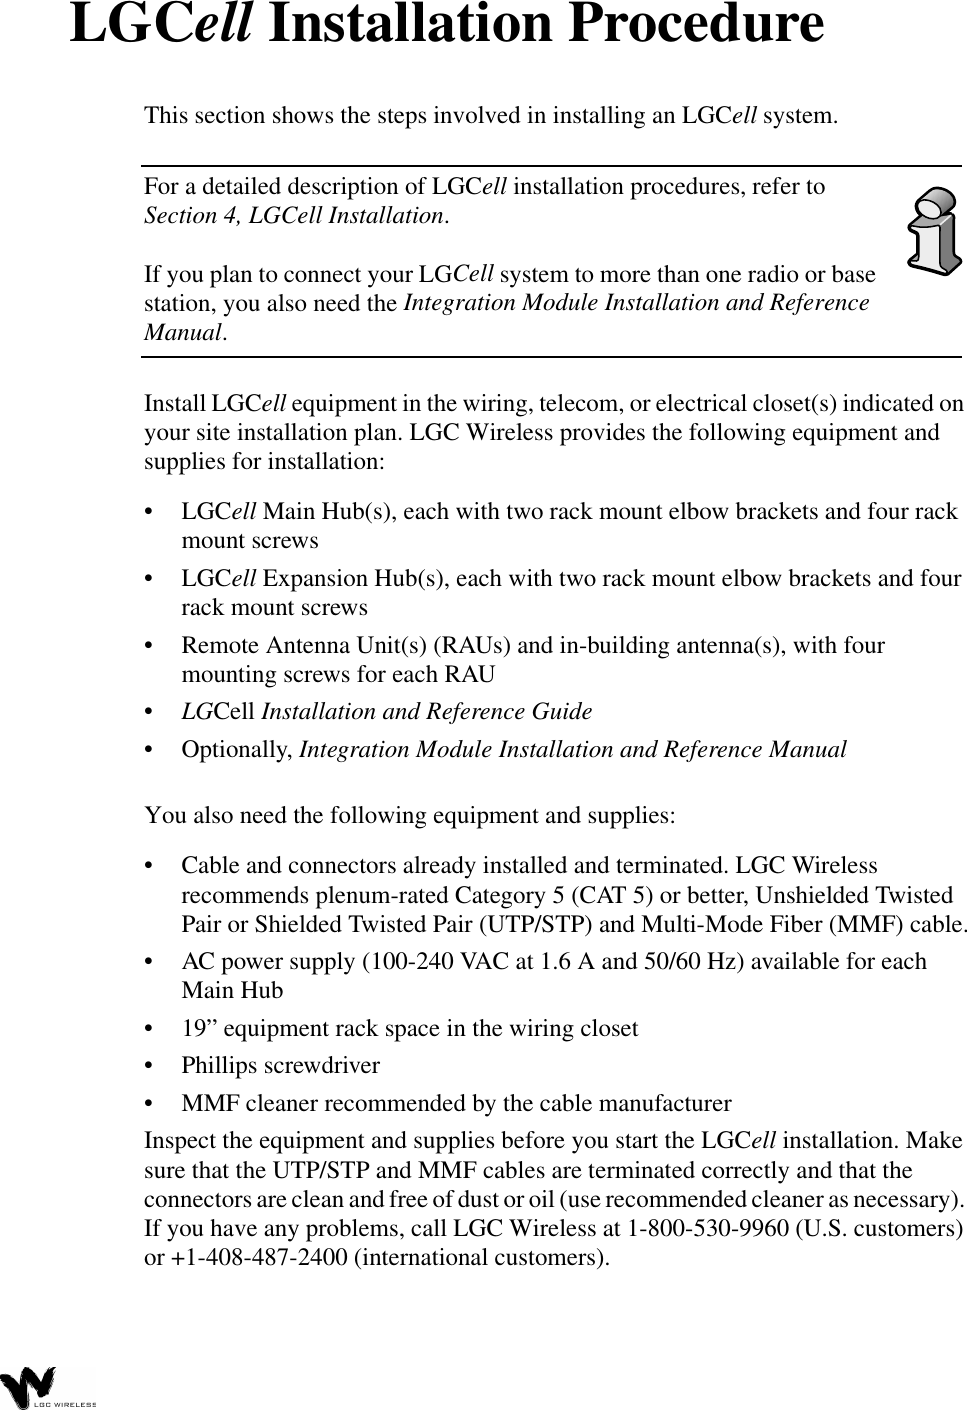 LGCell Installation ProcedureThis section shows the steps involved in installing an LGCell system.For a detailed description of LGCell installation procedures, refer to Section 4, LGCell Installation. If you plan to connect your LGCell system to more than one radio or base station, you also need the Integration Module Installation and Reference Manual. Install LGCell equipment in the wiring, telecom, or electrical closet(s) indicated on your site installation plan. LGC Wireless provides the following equipment and supplies for installation:•LGCell Main Hub(s), each with two rack mount elbow brackets and four rack mount screws•LGCell Expansion Hub(s), each with two rack mount elbow brackets and four rack mount screws•Remote Antenna Unit(s) (RAUs) and in-building antenna(s), with four mounting screws for each RAU•LGCell Installation and Reference Guide•Optionally, Integration Module Installation and Reference ManualYou also need the following equipment and supplies:•Cable and connectors already installed and terminated. LGC Wireless recommends plenum-rated Category 5 (CAT 5) or better, Unshielded Twisted Pair or Shielded Twisted Pair (UTP/STP) and Multi-Mode Fiber (MMF) cable.•AC power supply (100-240 VAC at 1.6 A and 50/60 Hz) available for each Main Hub•19” equipment rack space in the wiring closet•Phillips screwdriver•MMF cleaner recommended by the cable manufacturerInspect the equipment and supplies before you start the LGCell installation. Make sure that the UTP/STP and MMF cables are terminated correctly and that the connectors are clean and free of dust or oil (use recommended cleaner as necessary). If you have any problems, call LGC Wireless at 1-800-530-9960 (U.S. customers) or +1-408-487-2400 (international customers).